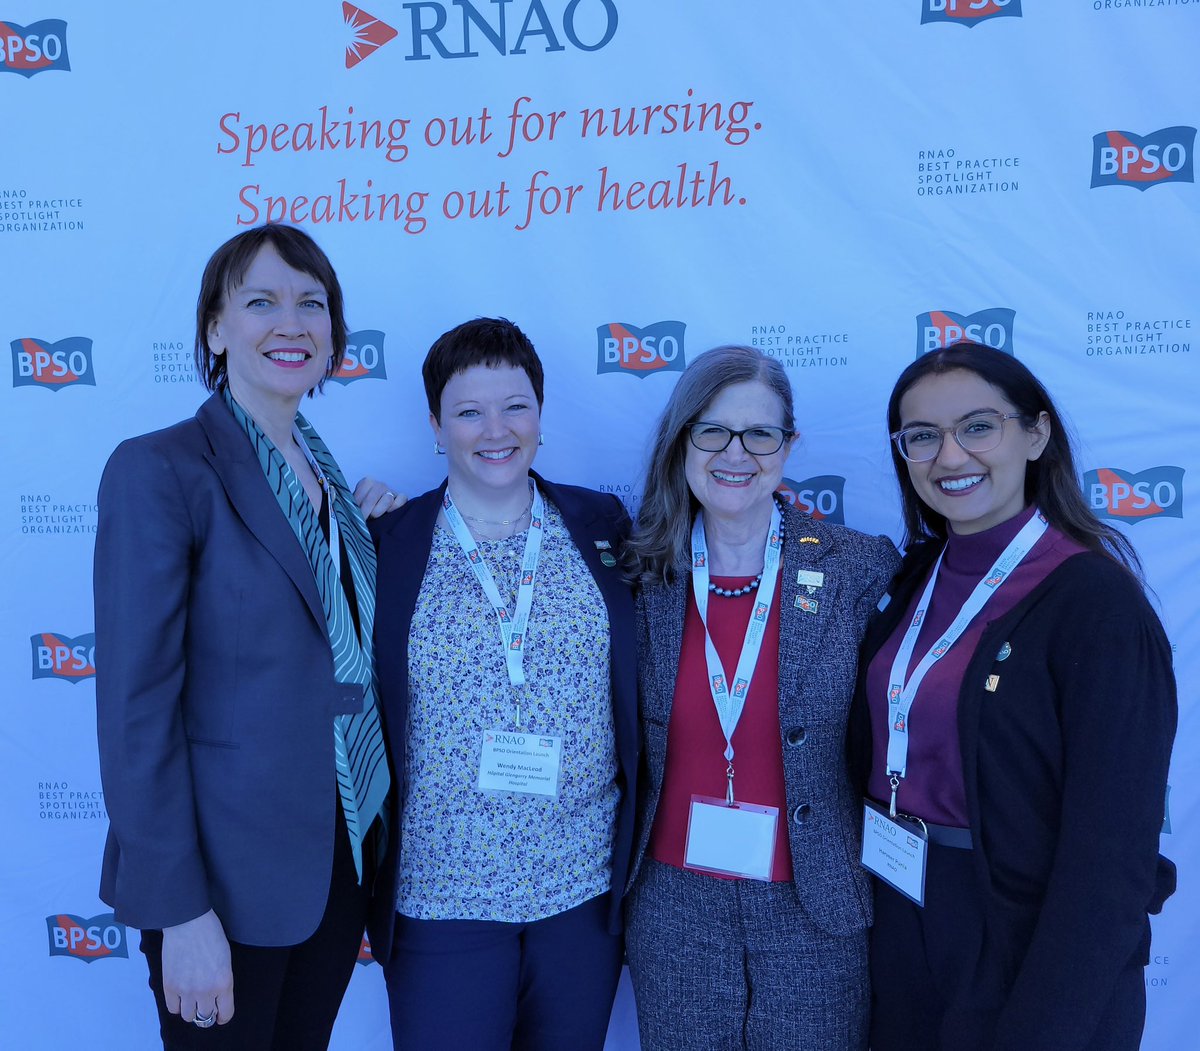 A week ago I had the privilege of sharing our @GlengarryHosp @RNAO BPSO knowledge with Cohort 8. A career highlight for me - smiles say it all! @SusanMcNeill_ @DorisGrinspun @harveerpunia